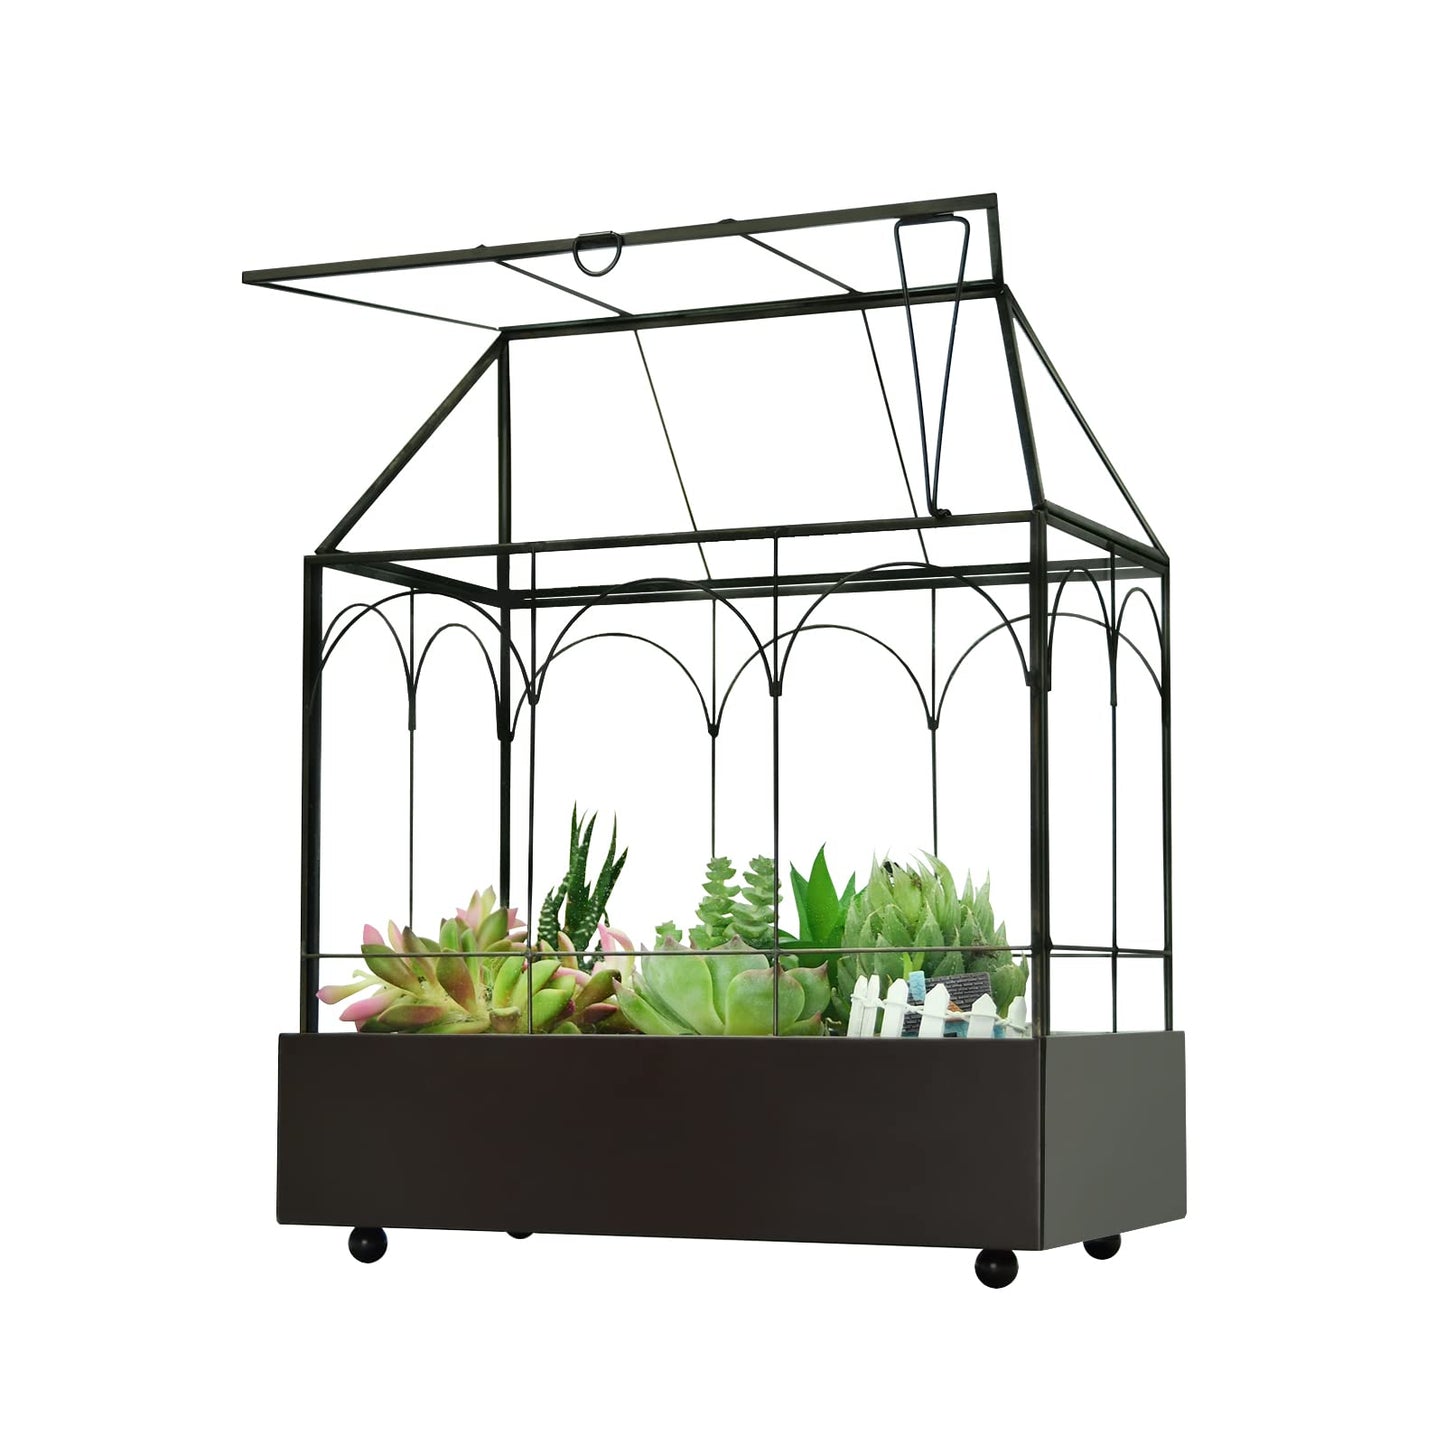 YIMORENCE V Large Tall Glass Plant Terrarium – House Succulent Terrarium Kit with Lip and Tray, 9.5”X5.7”X11.4”